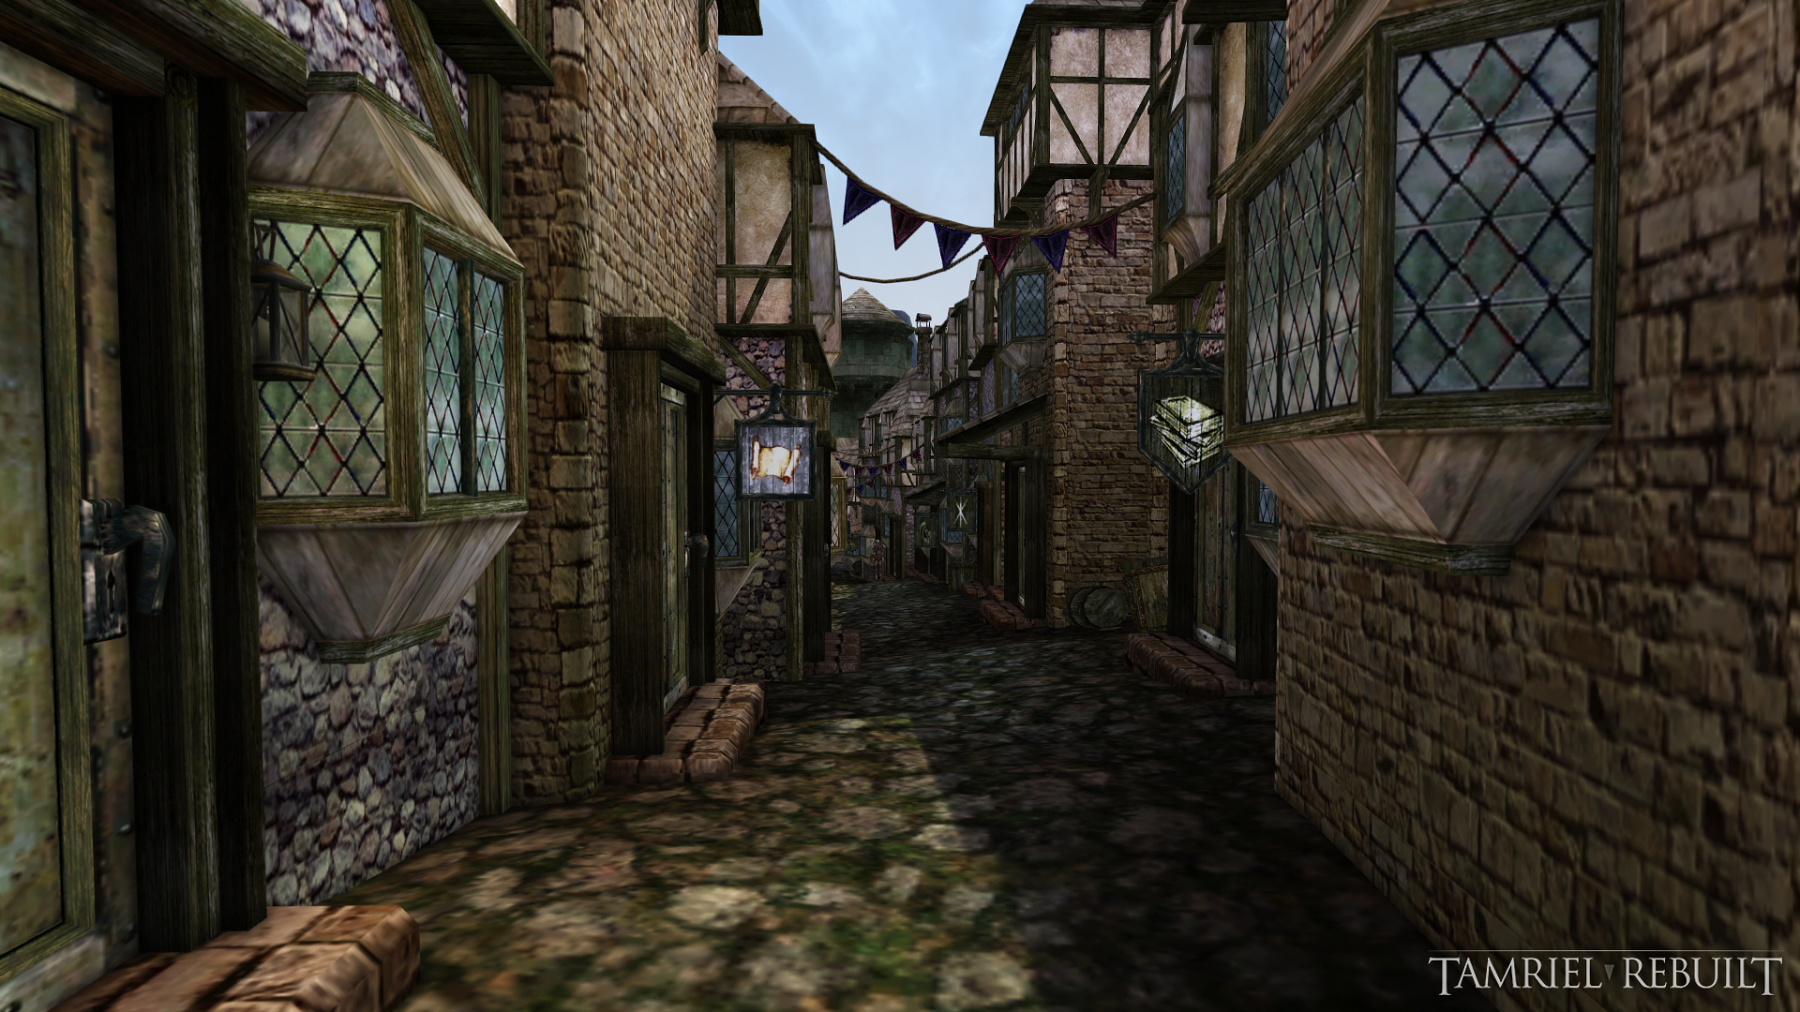 Screenshot from Morrowind mod "Tamriel Rebuilt" showing a narrow street with homes on either side.